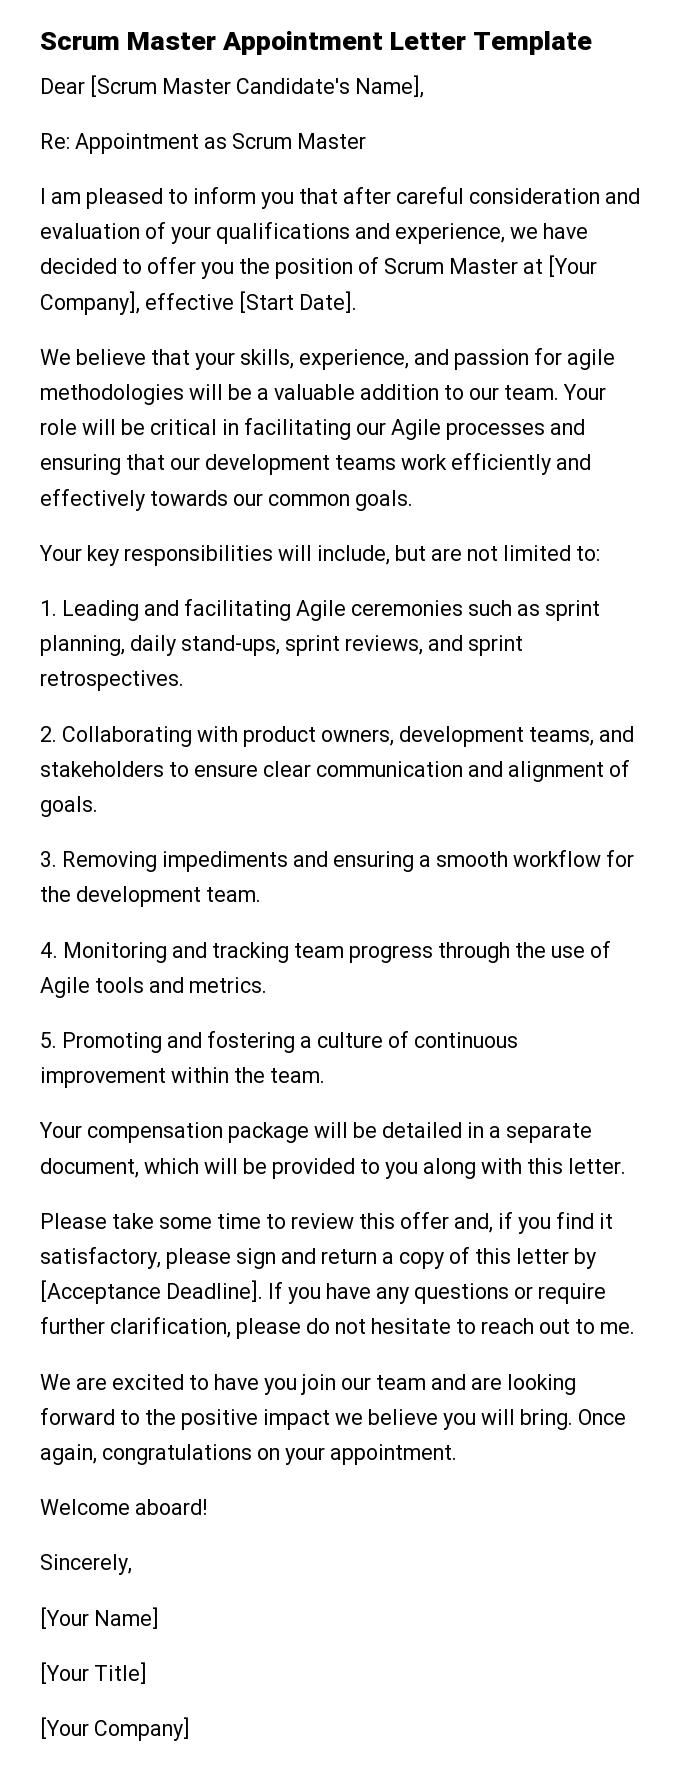 Scrum Master Appointment Letter Template